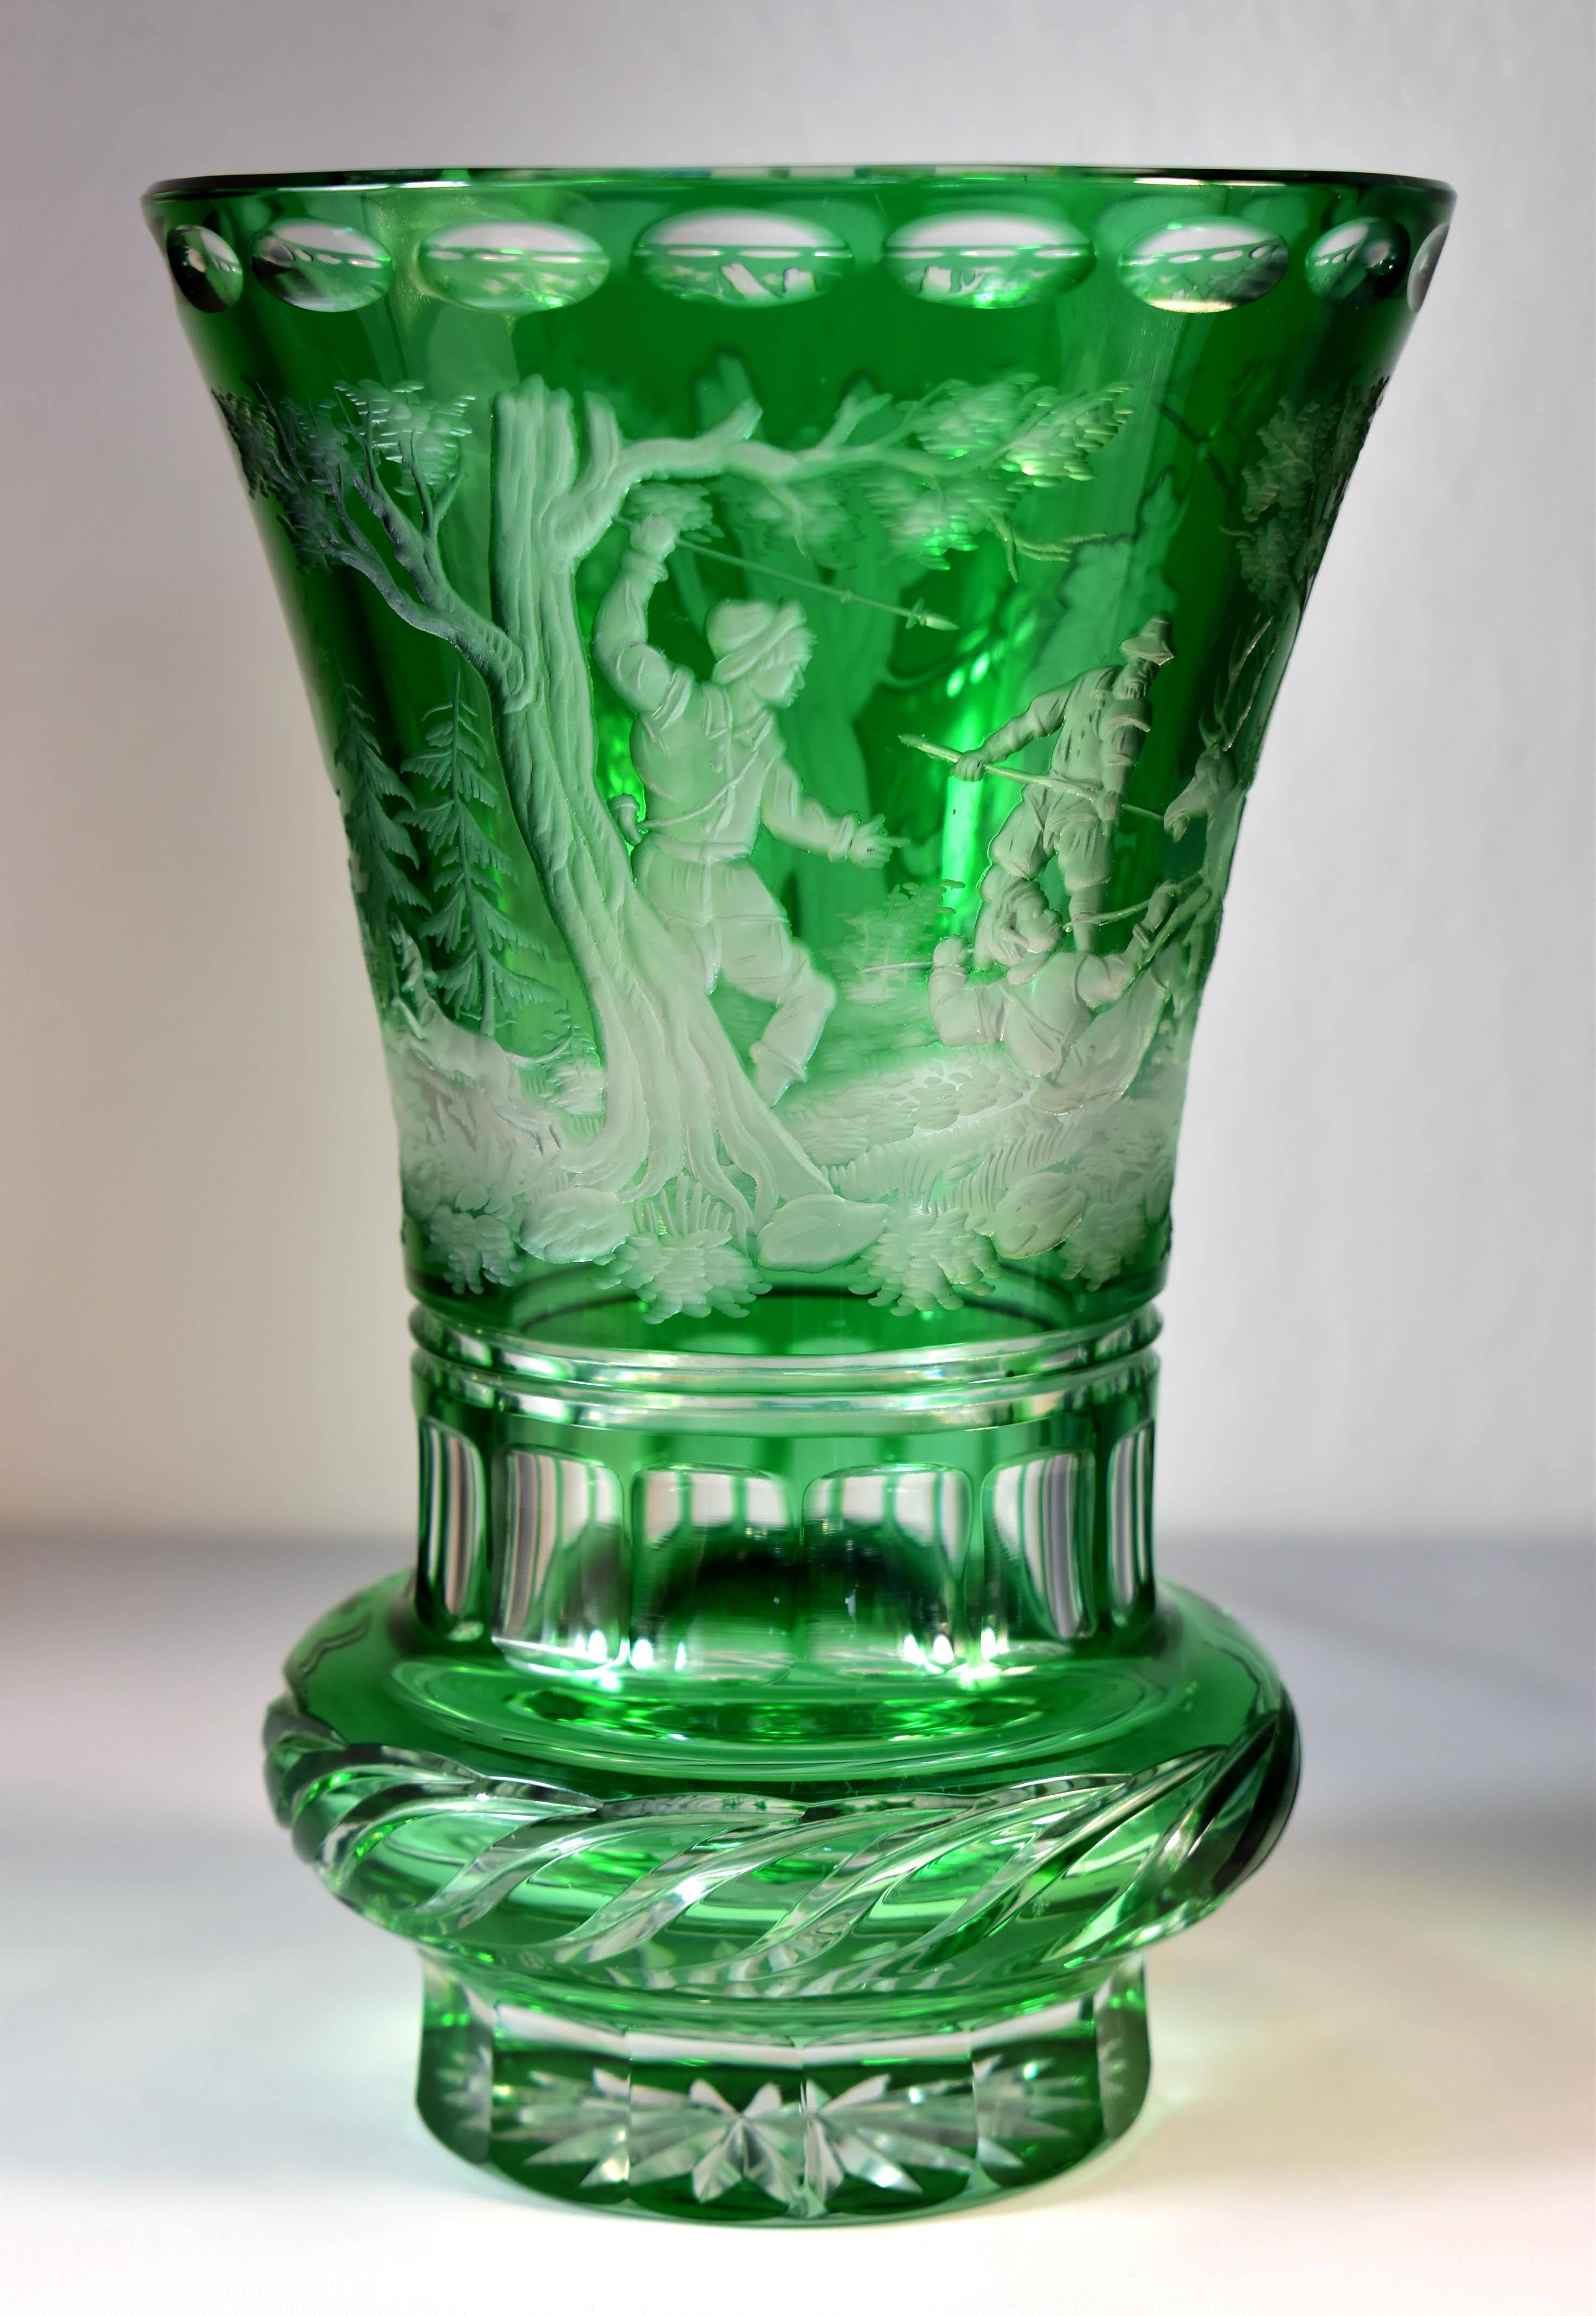 Beautiful green overlay vase, cut with an engraved hunting motif, Depicted deer hunting scene, The engraving is made using the old copper engraving technique, This is Bohemian glass from the 20th century, It is a beautiful collector's piece that